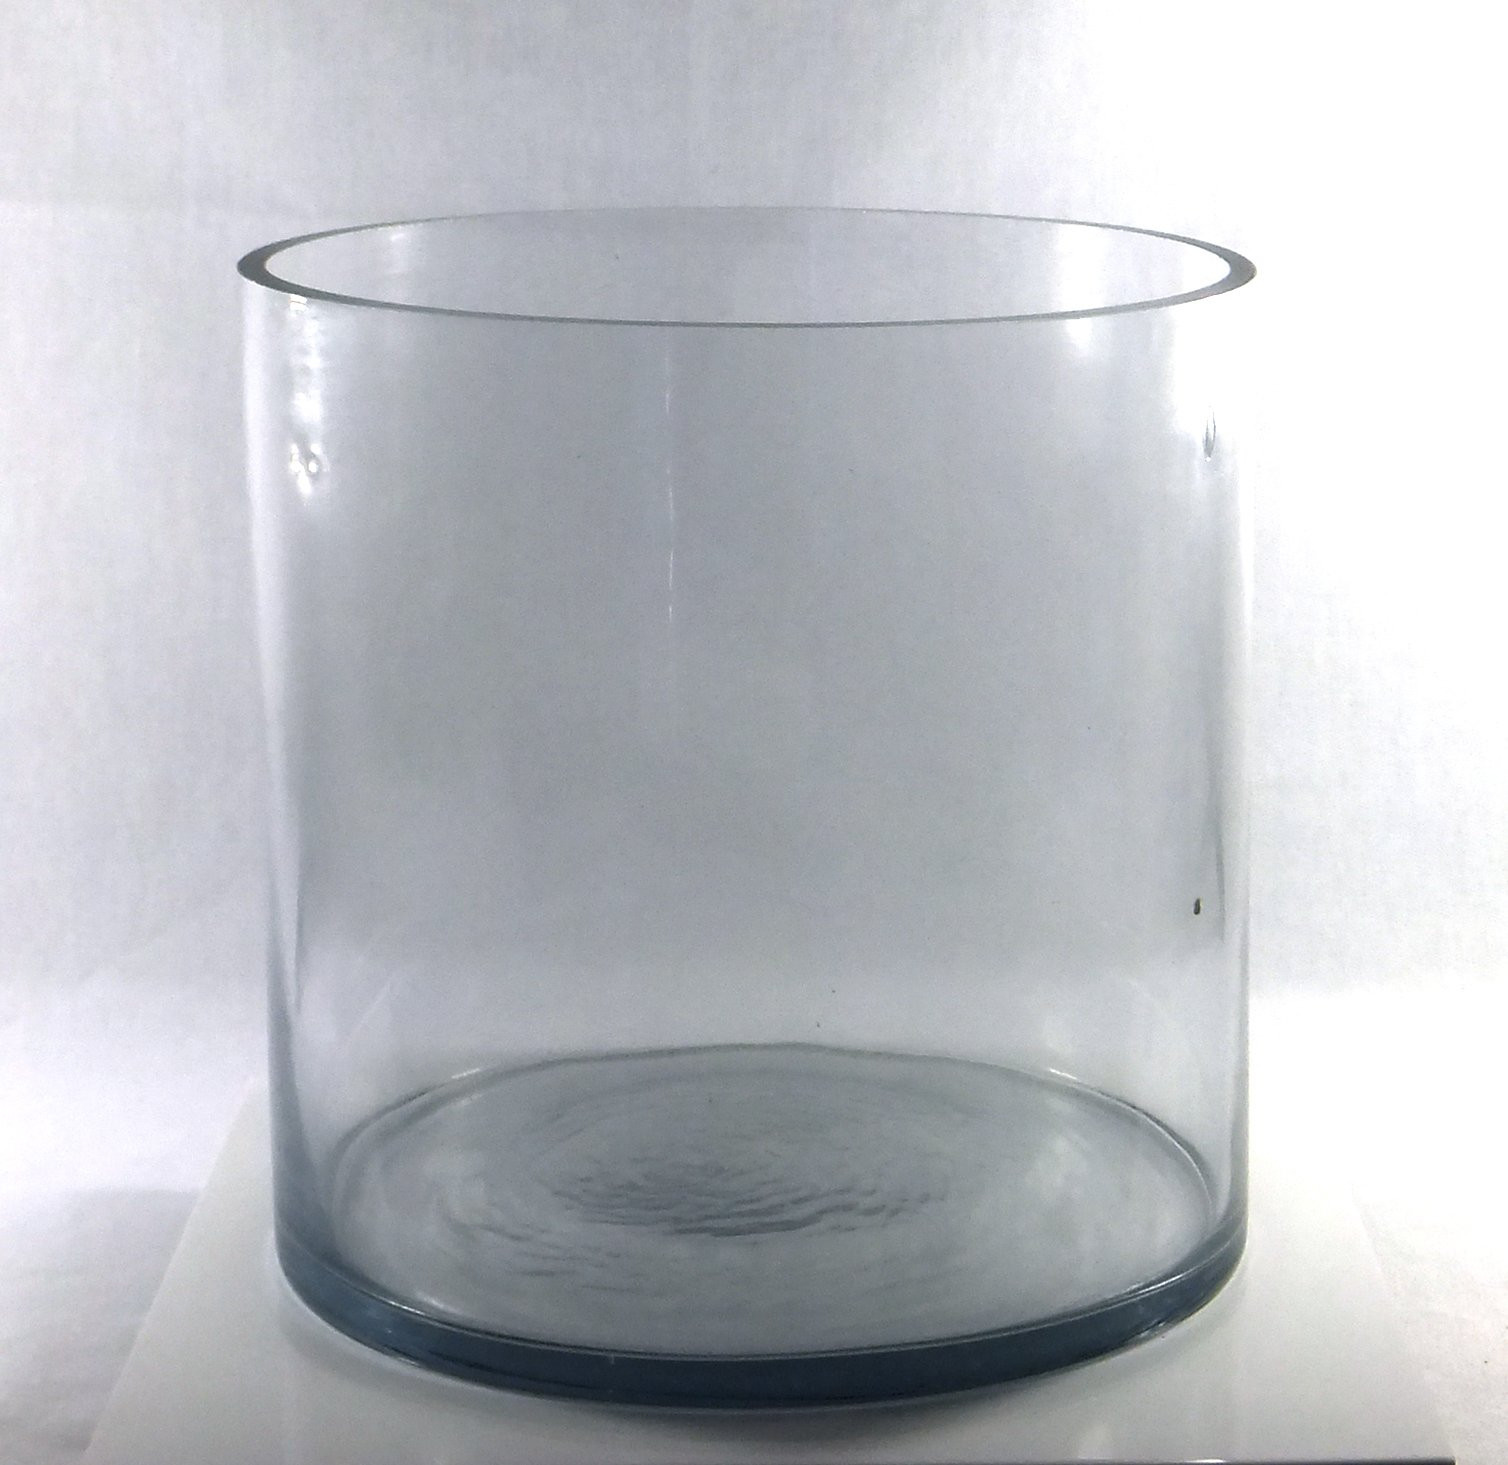 28 Awesome Large Round Clear Glass Vase 2023 free download large round clear glass vase of buy 8 inch round large glass vase 8 clear cylinder oversize within 8 inch round large glass vase 8 clear cylinder oversize centerpiece 8x8